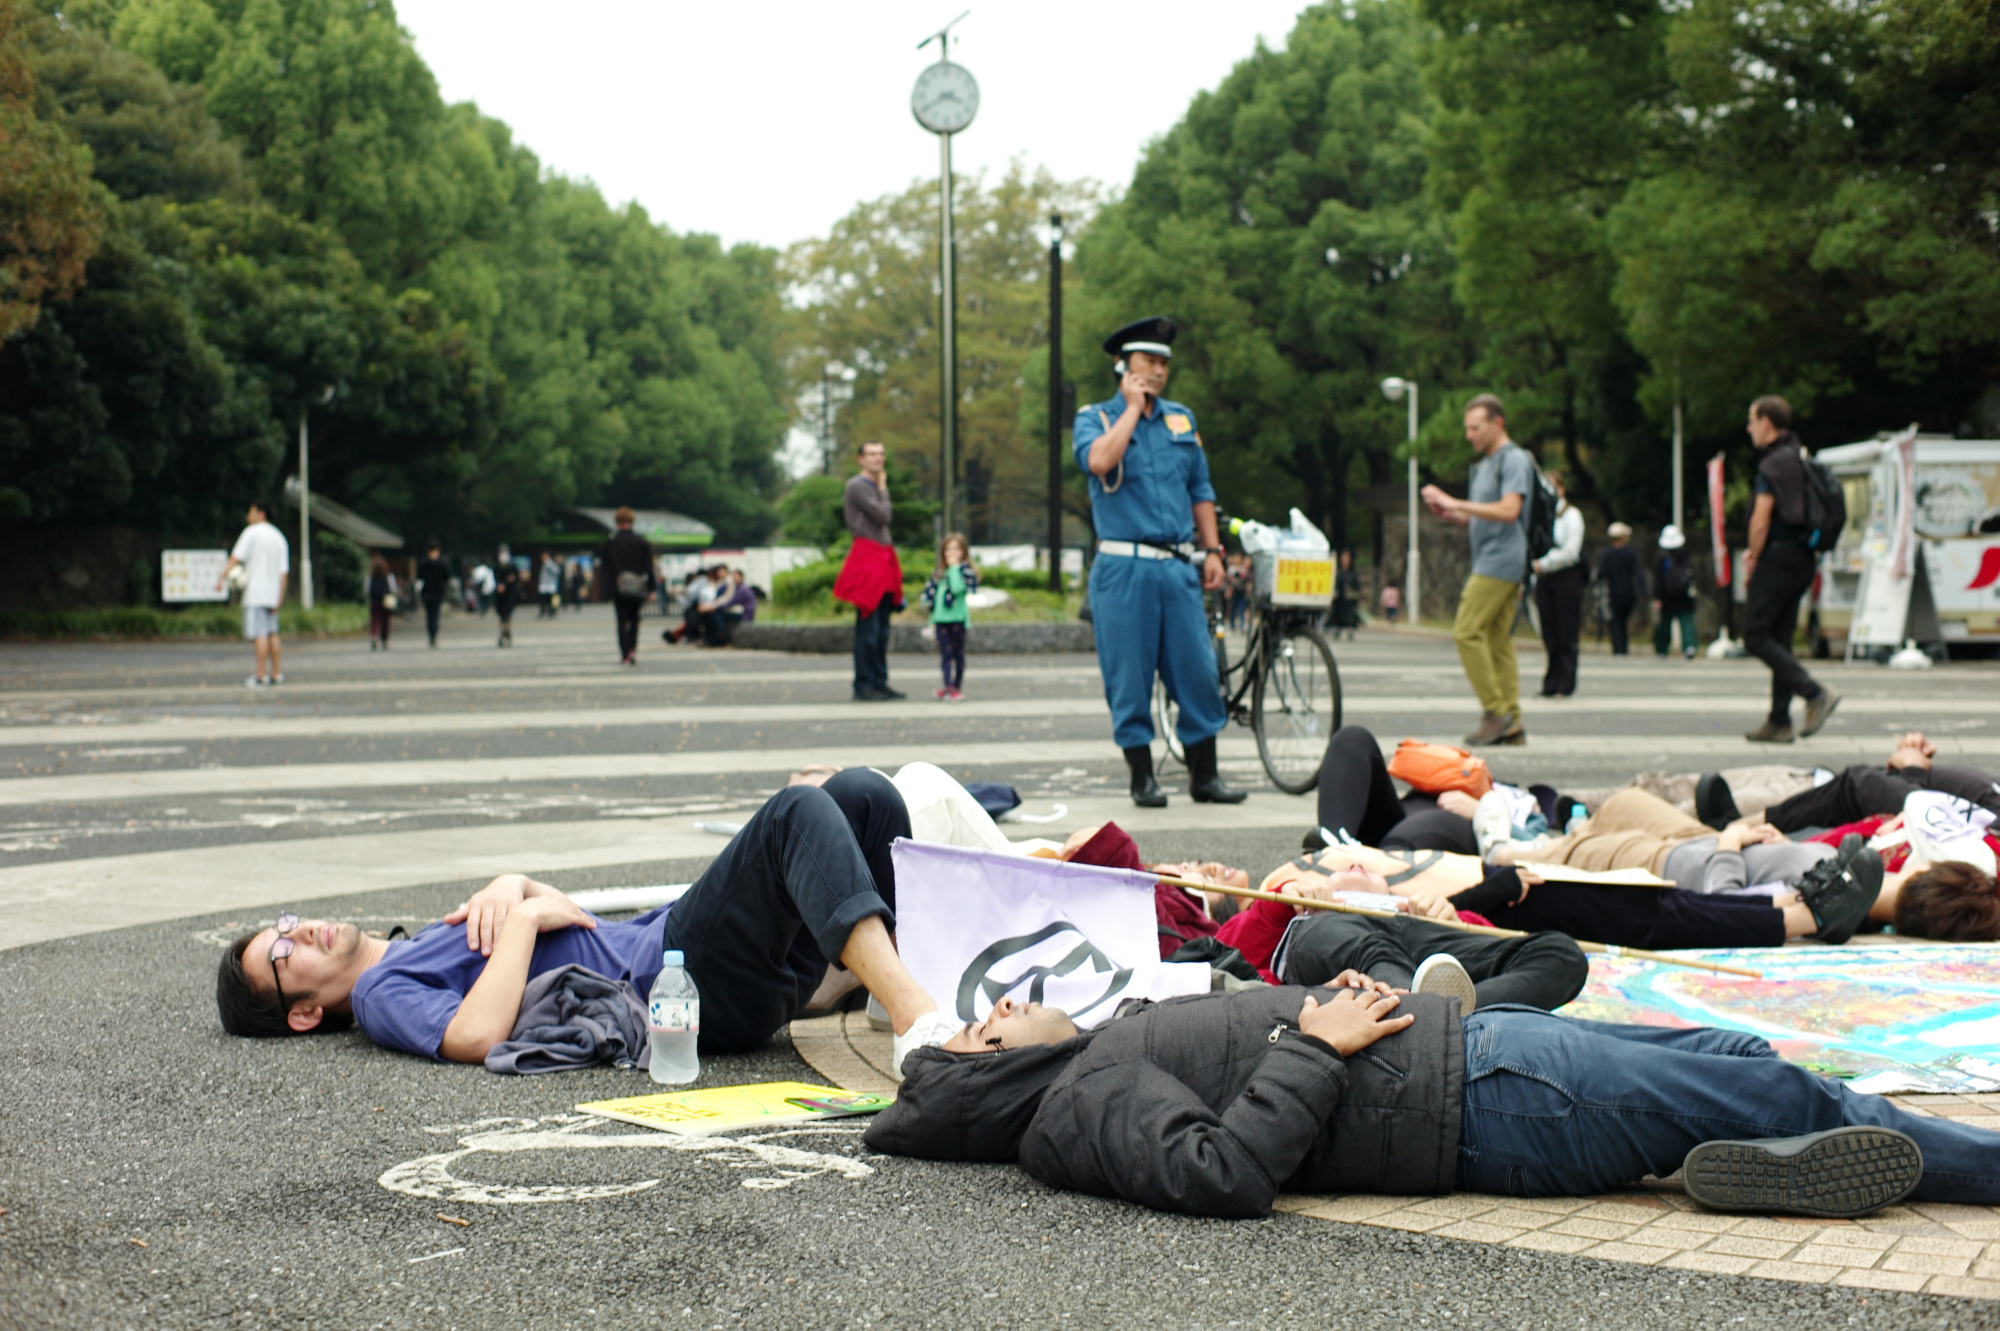 Extinction Rebellion protesters stage a 'die-in' at the entrance to Yoyogi Park on Saturday to call on the government to create a legally binding policy to reduce carbon emissions to zero by 2025. | RYUSEI TAKAHASHI